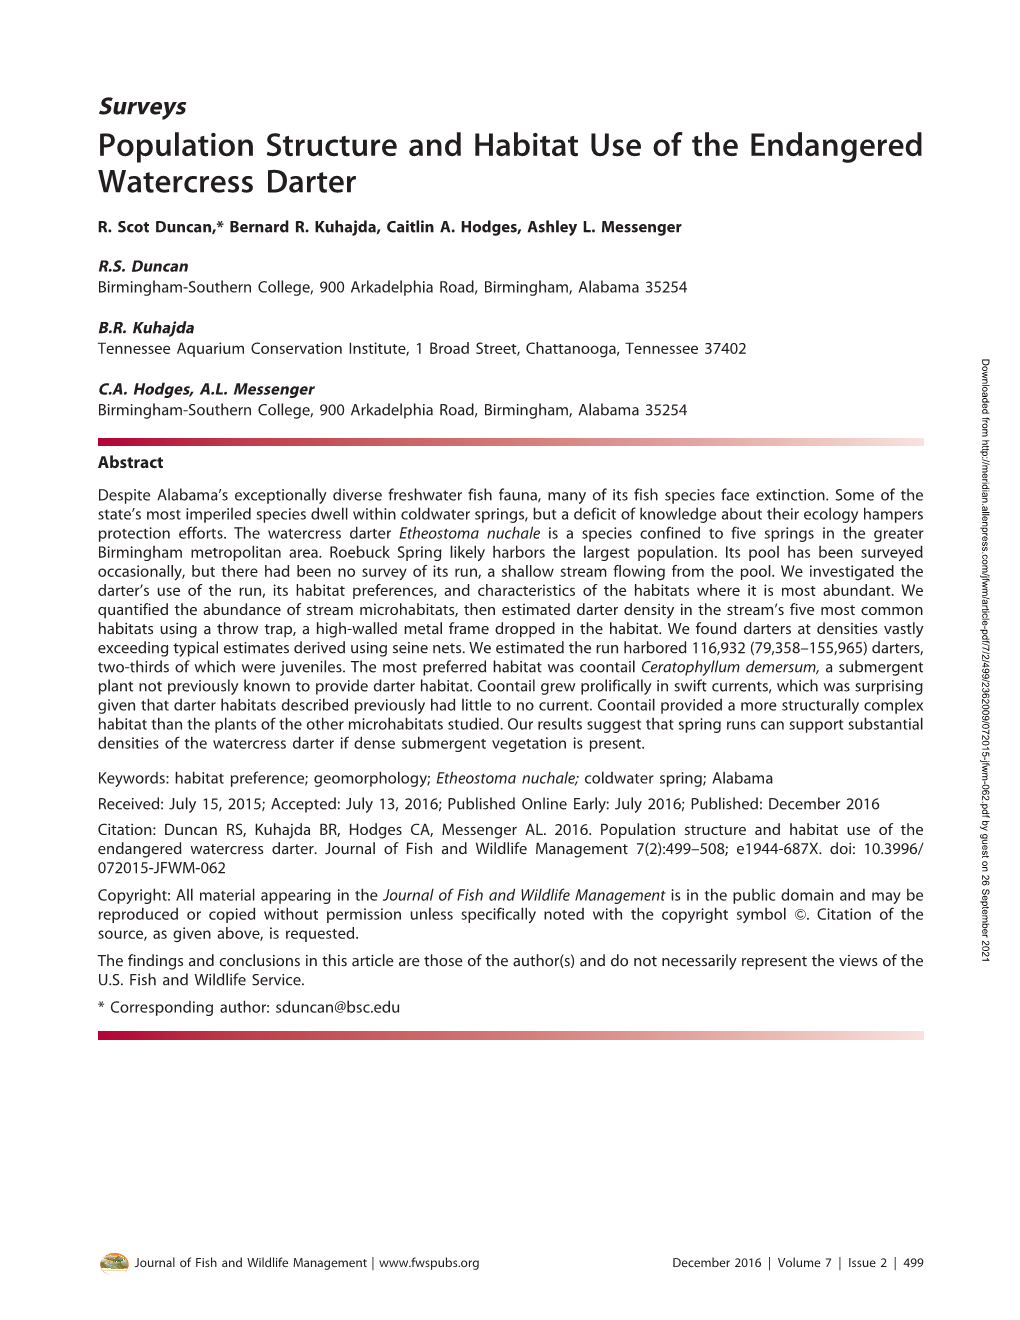 Population Structure and Habitat Use of the Endangered Watercress Darter